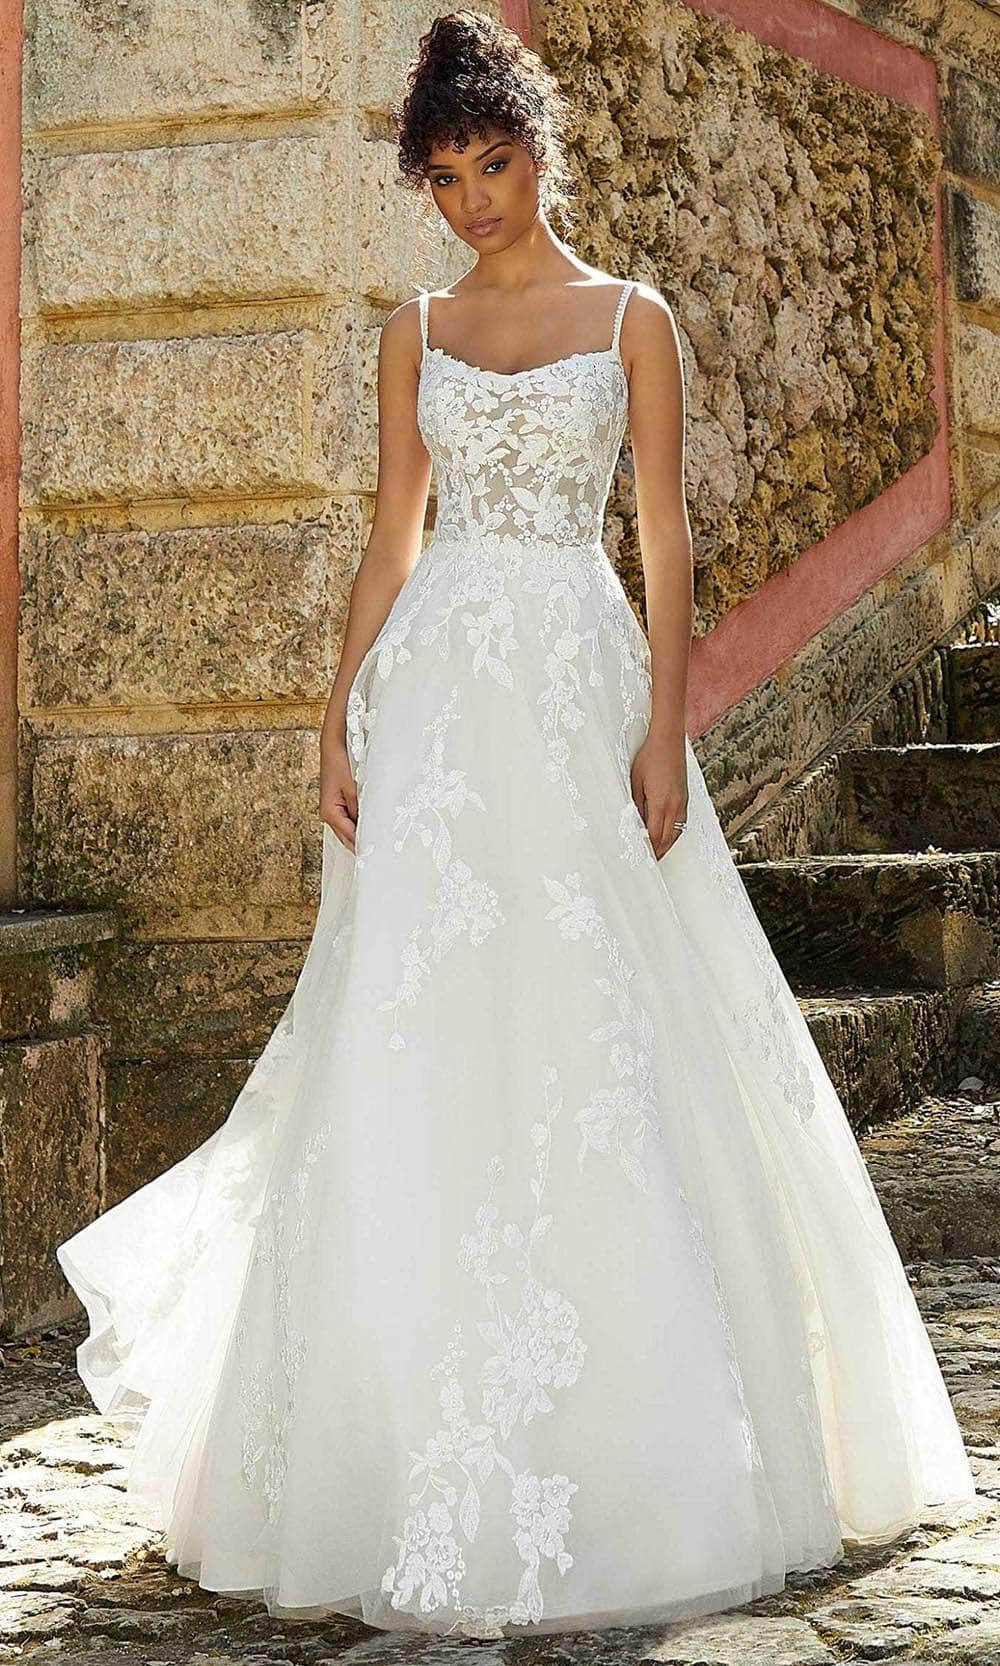 Image of Mori Lee Bridal 2474 - Lace Embroidered Scoop Neck Wedding Dress